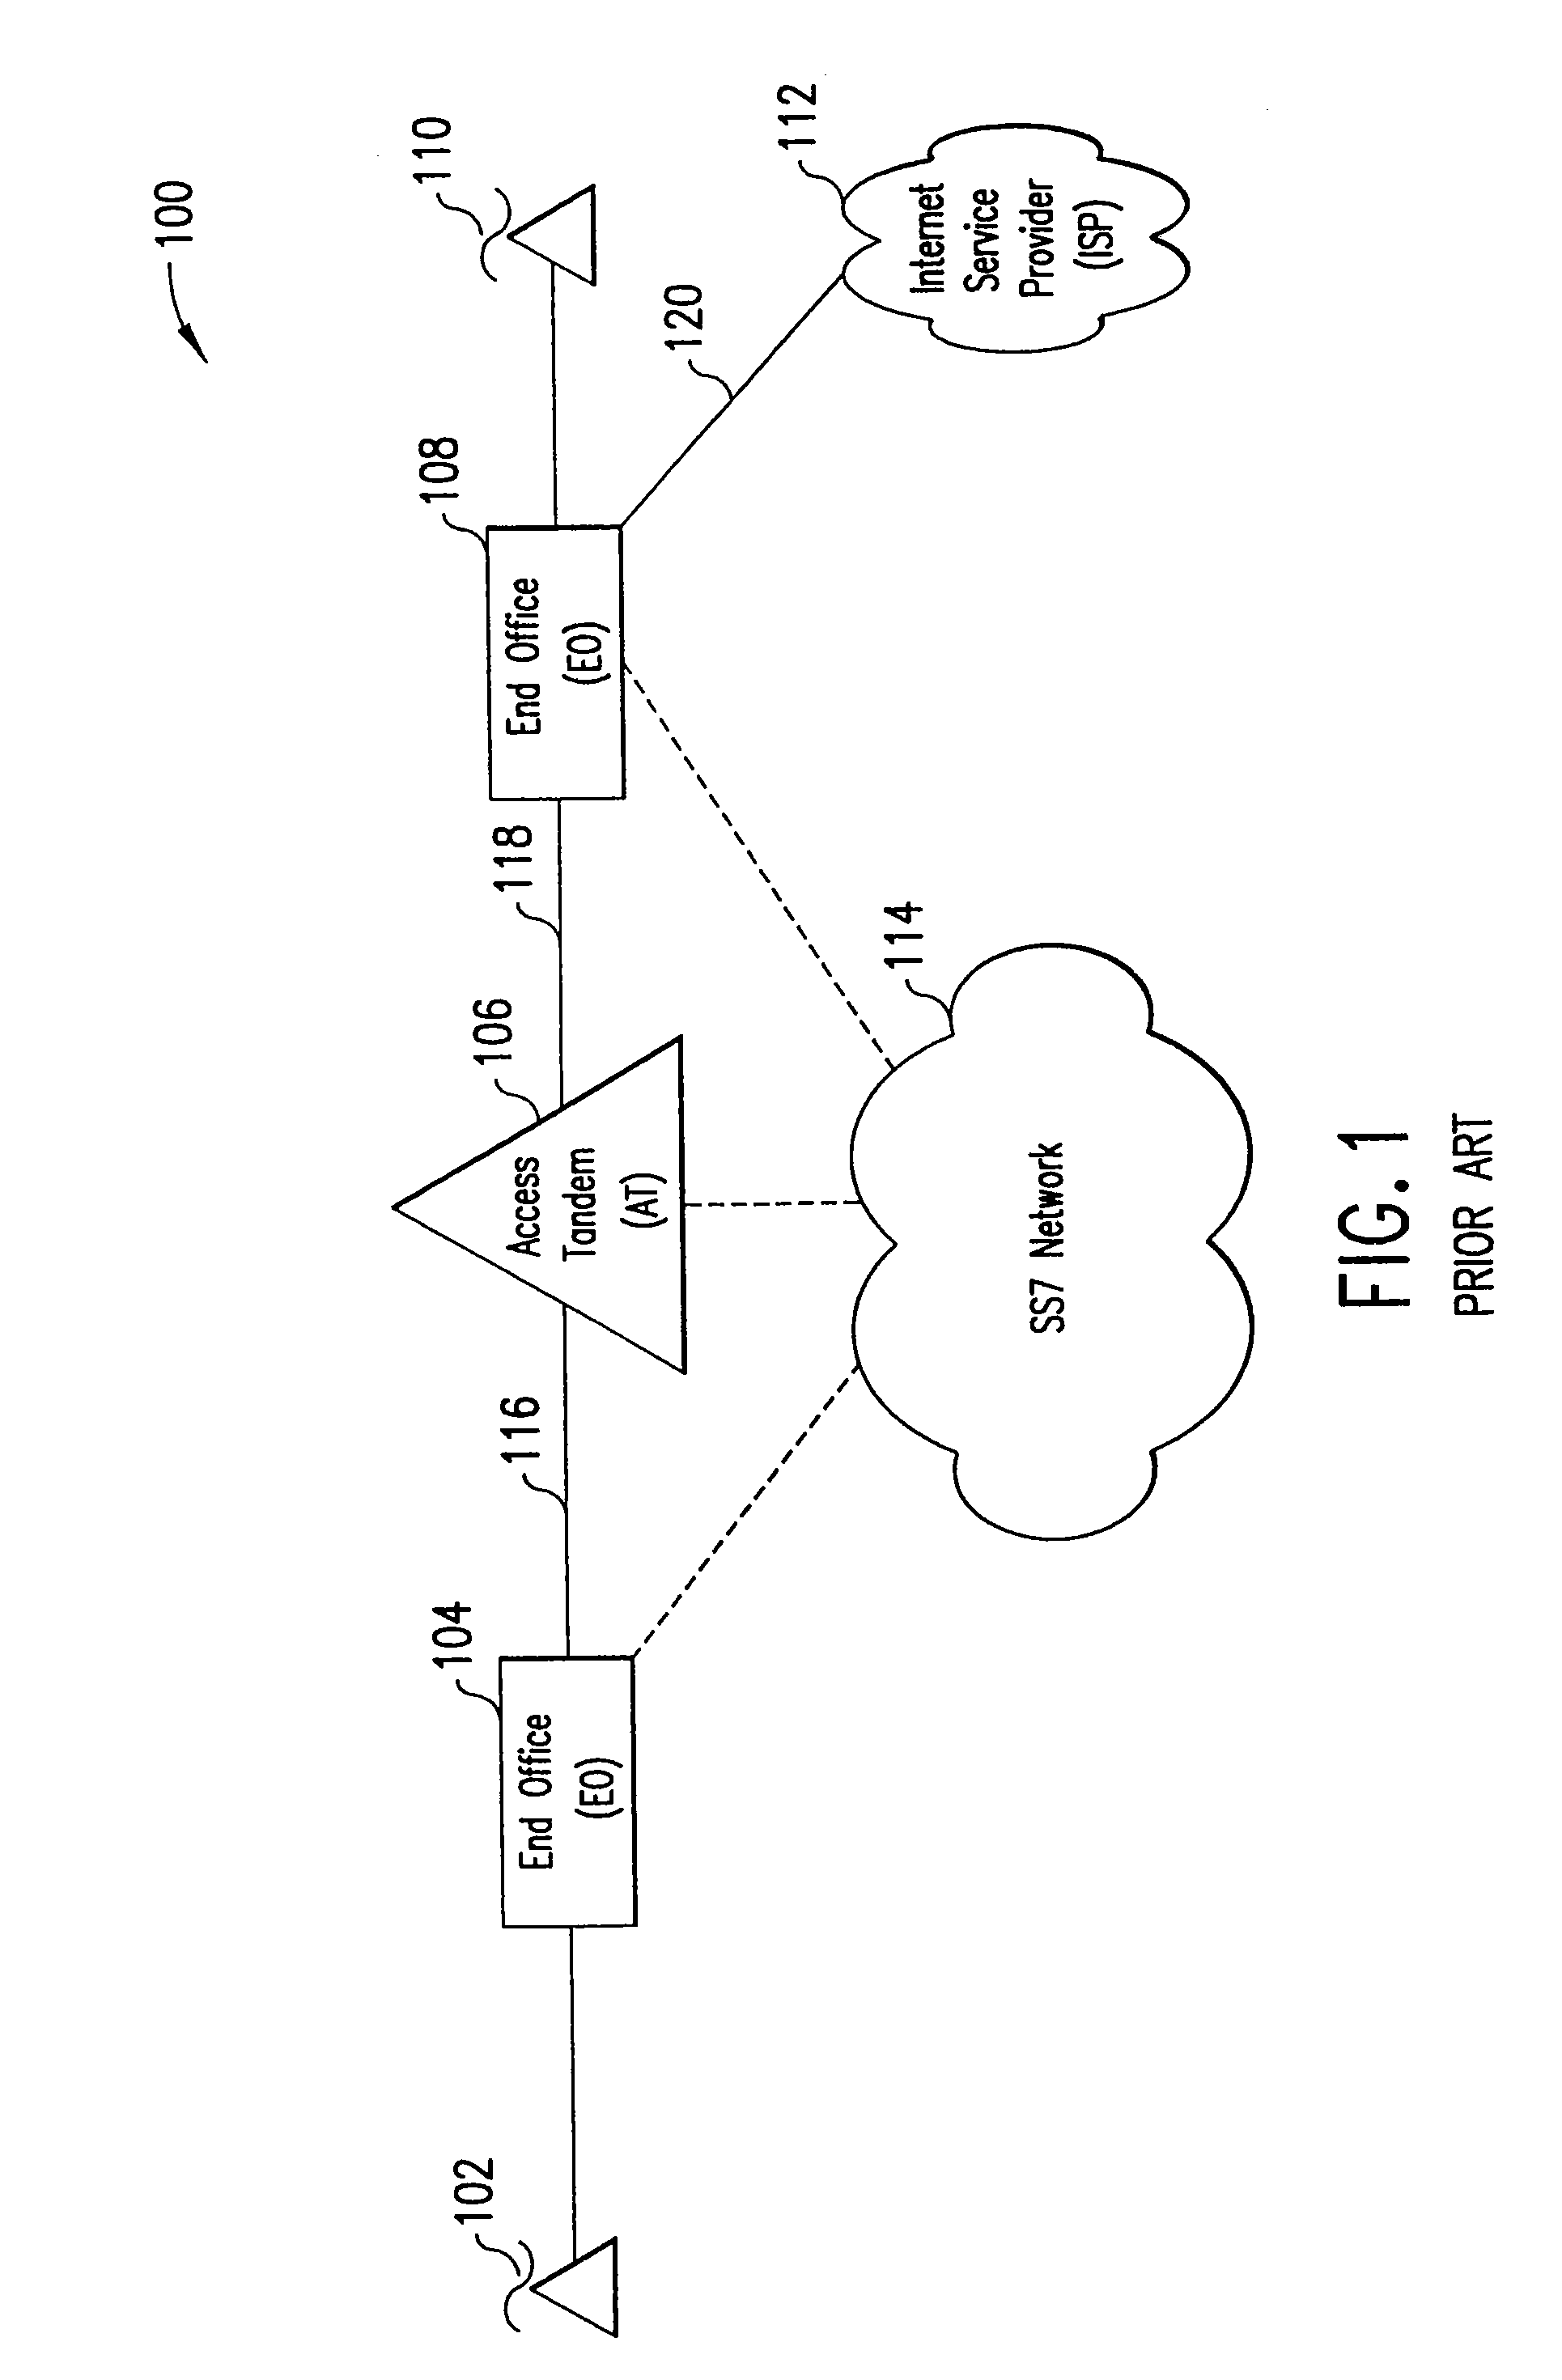 System and method for bypassing data from egress facilities